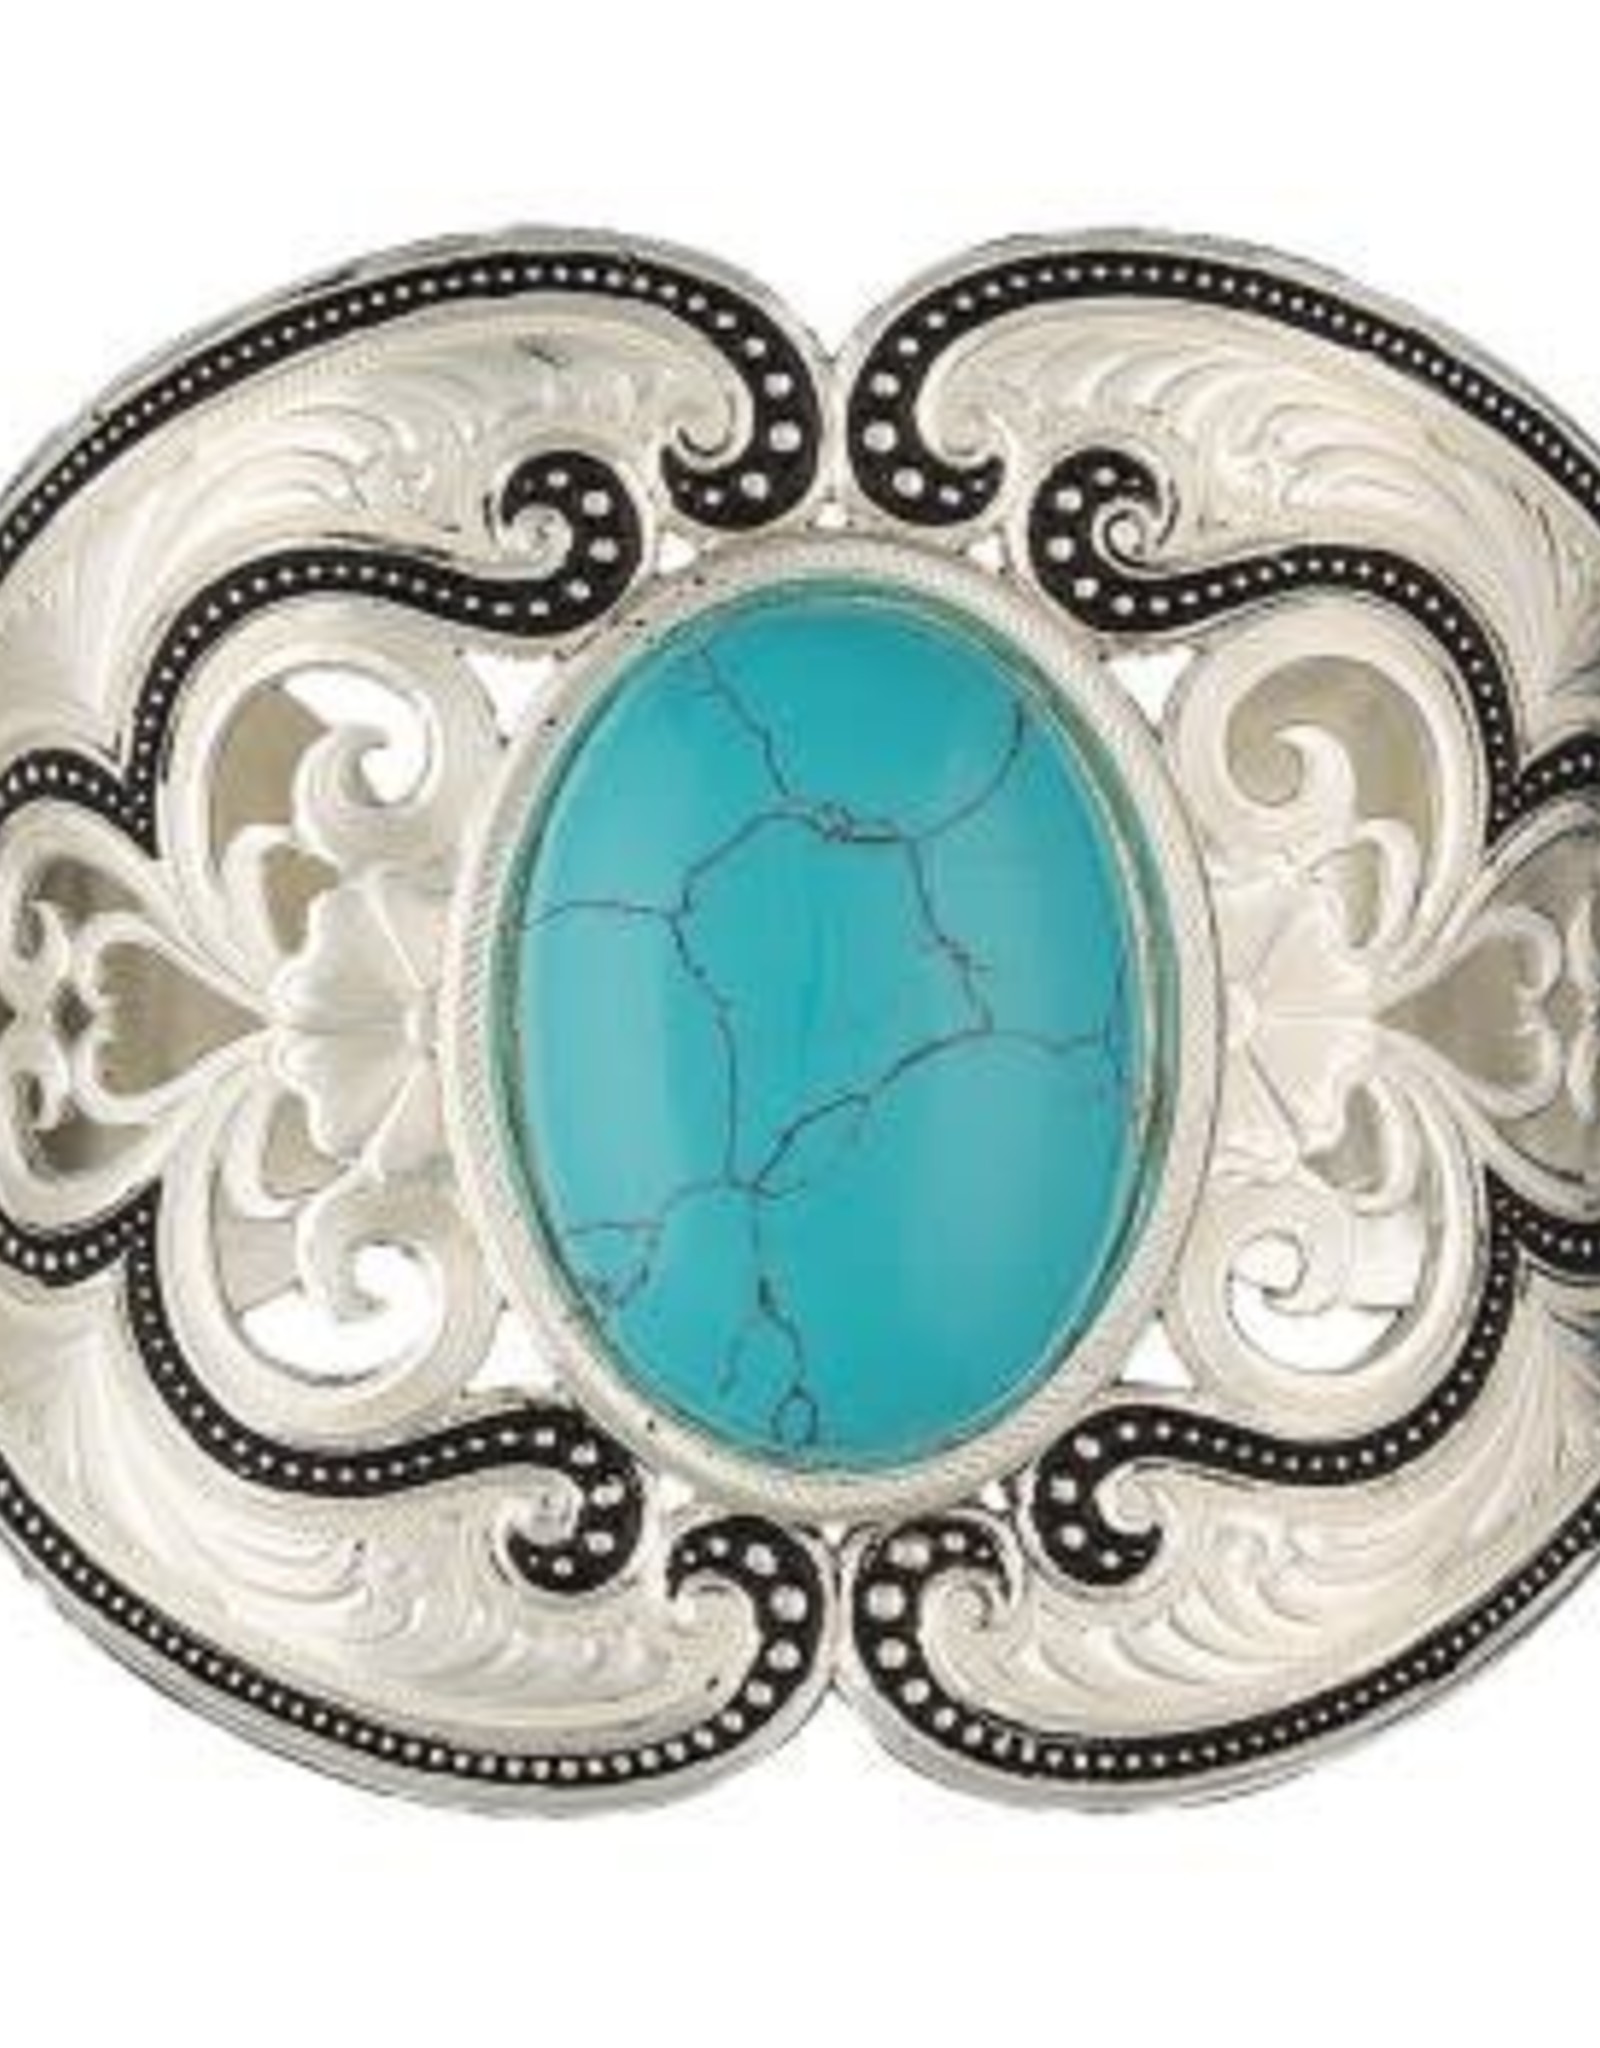 Montana Silversmiths Silver Pinpoints and Western Lace Cuff Bracelet with Turquoise